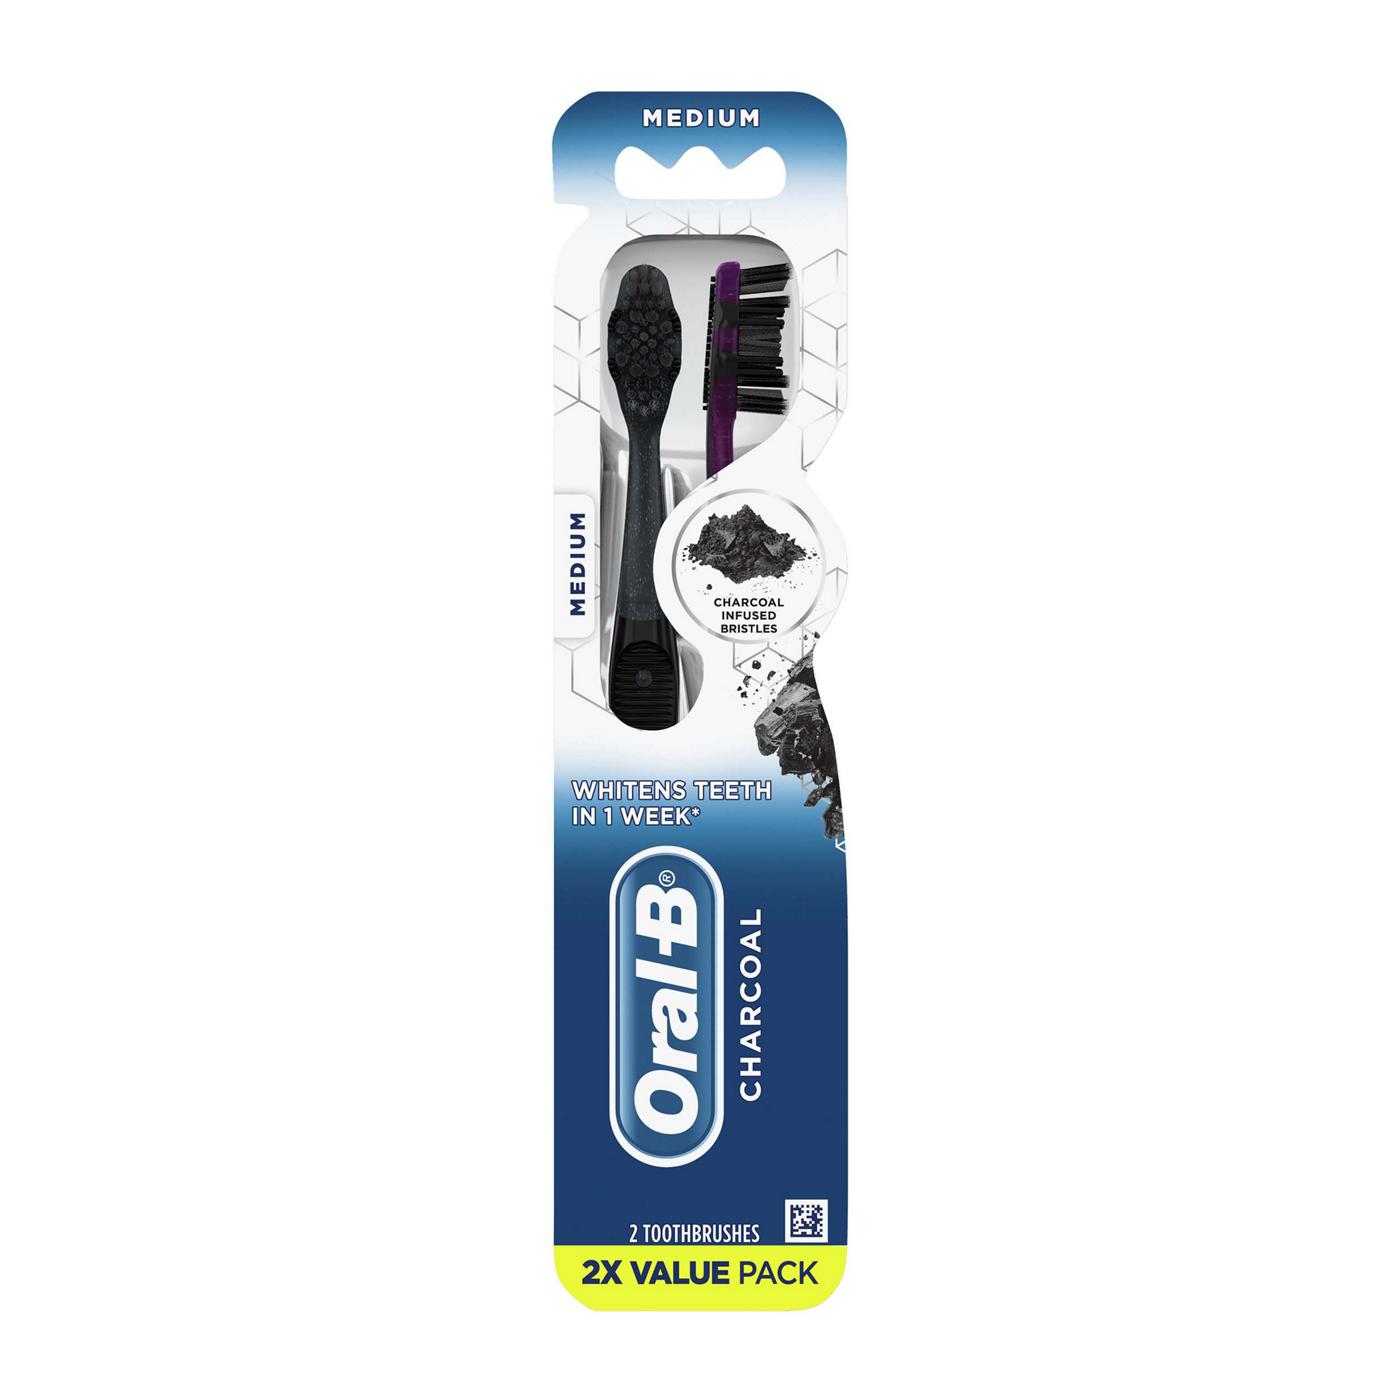 Oral-B Charcoal Toothbrushes Medium; image 1 of 10